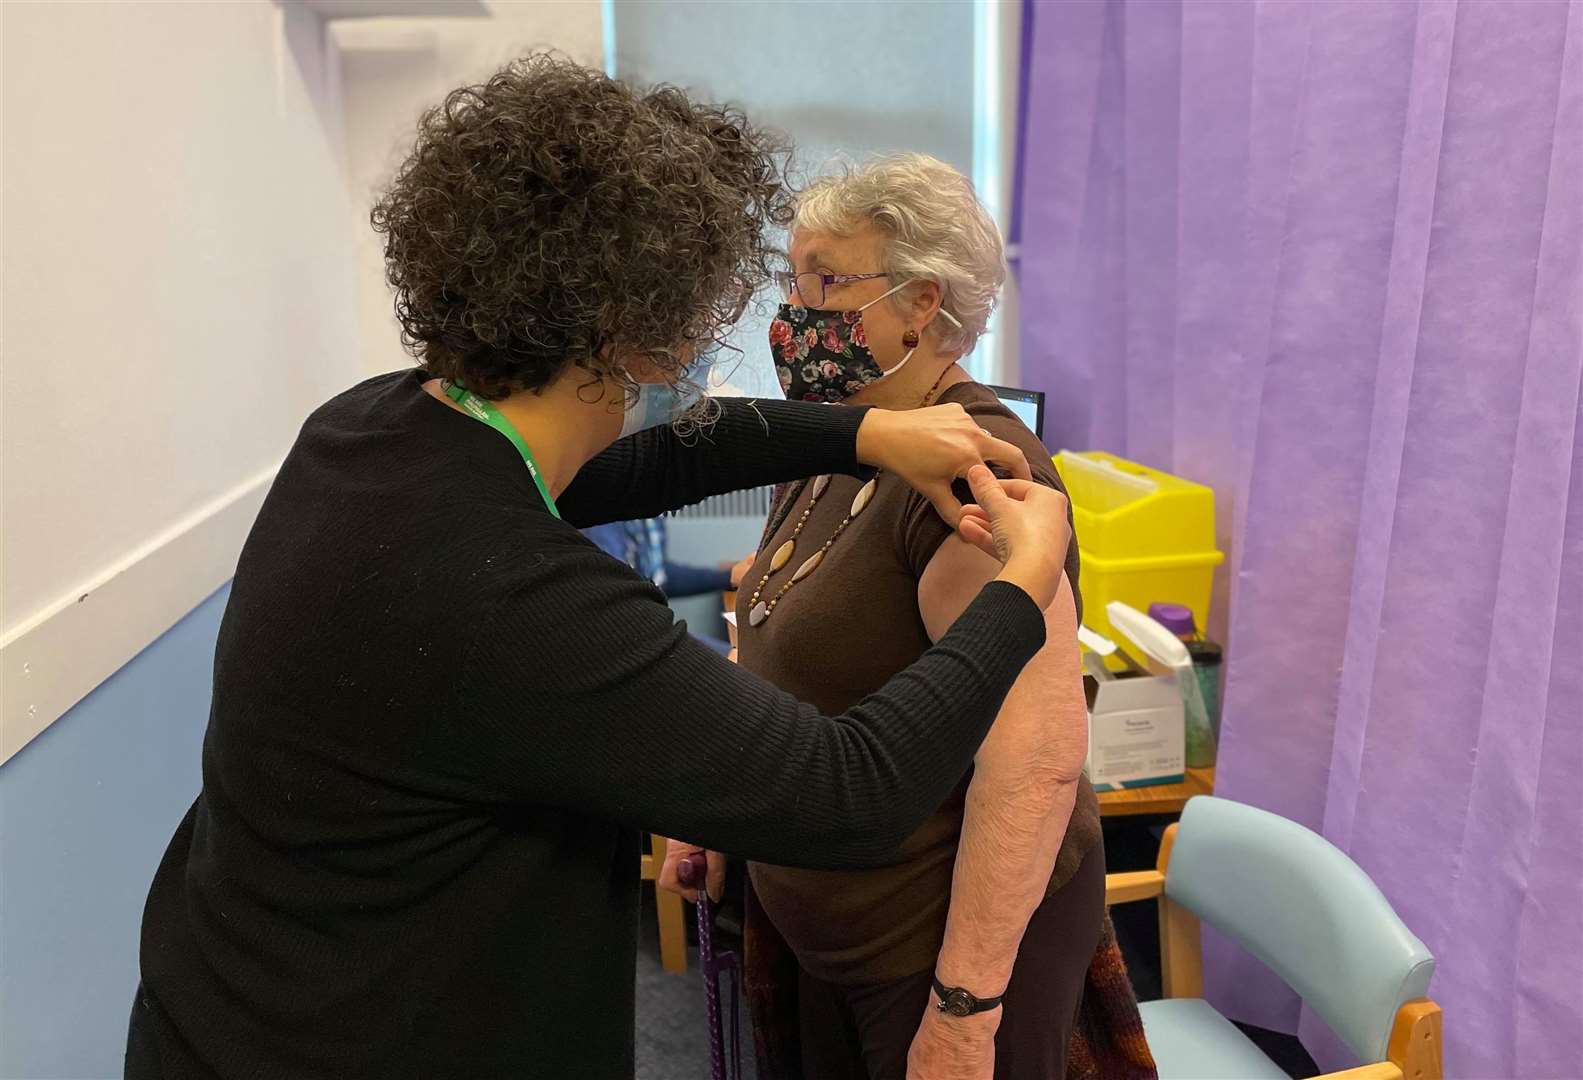 Dr Hilary Audsley, GP at The Chestnuts Surgery in Sittingbourne, giving patient Rowena Mount her first dose of the coronavirus vaccine today